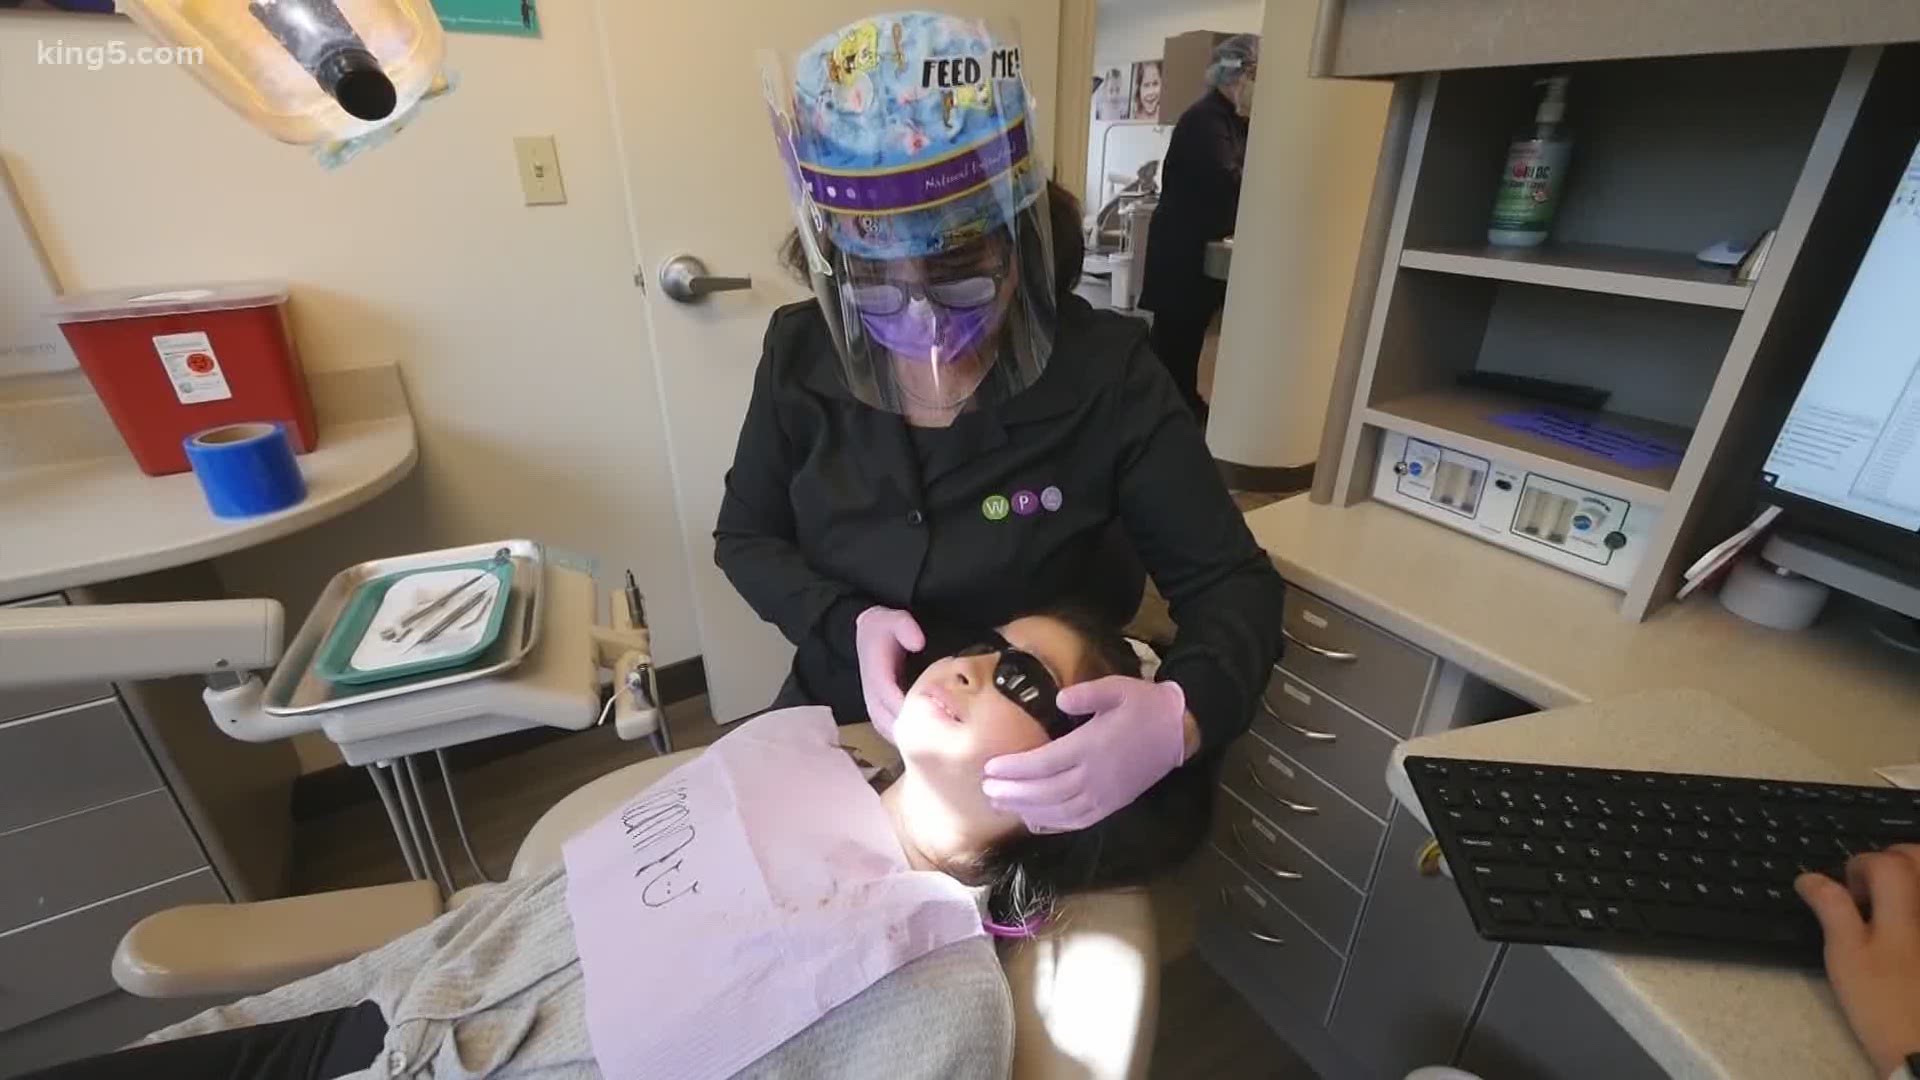 With new guidelines allowing Washington dentist offices to reopen, dentists are finding it a good time to reconnect with their patients.